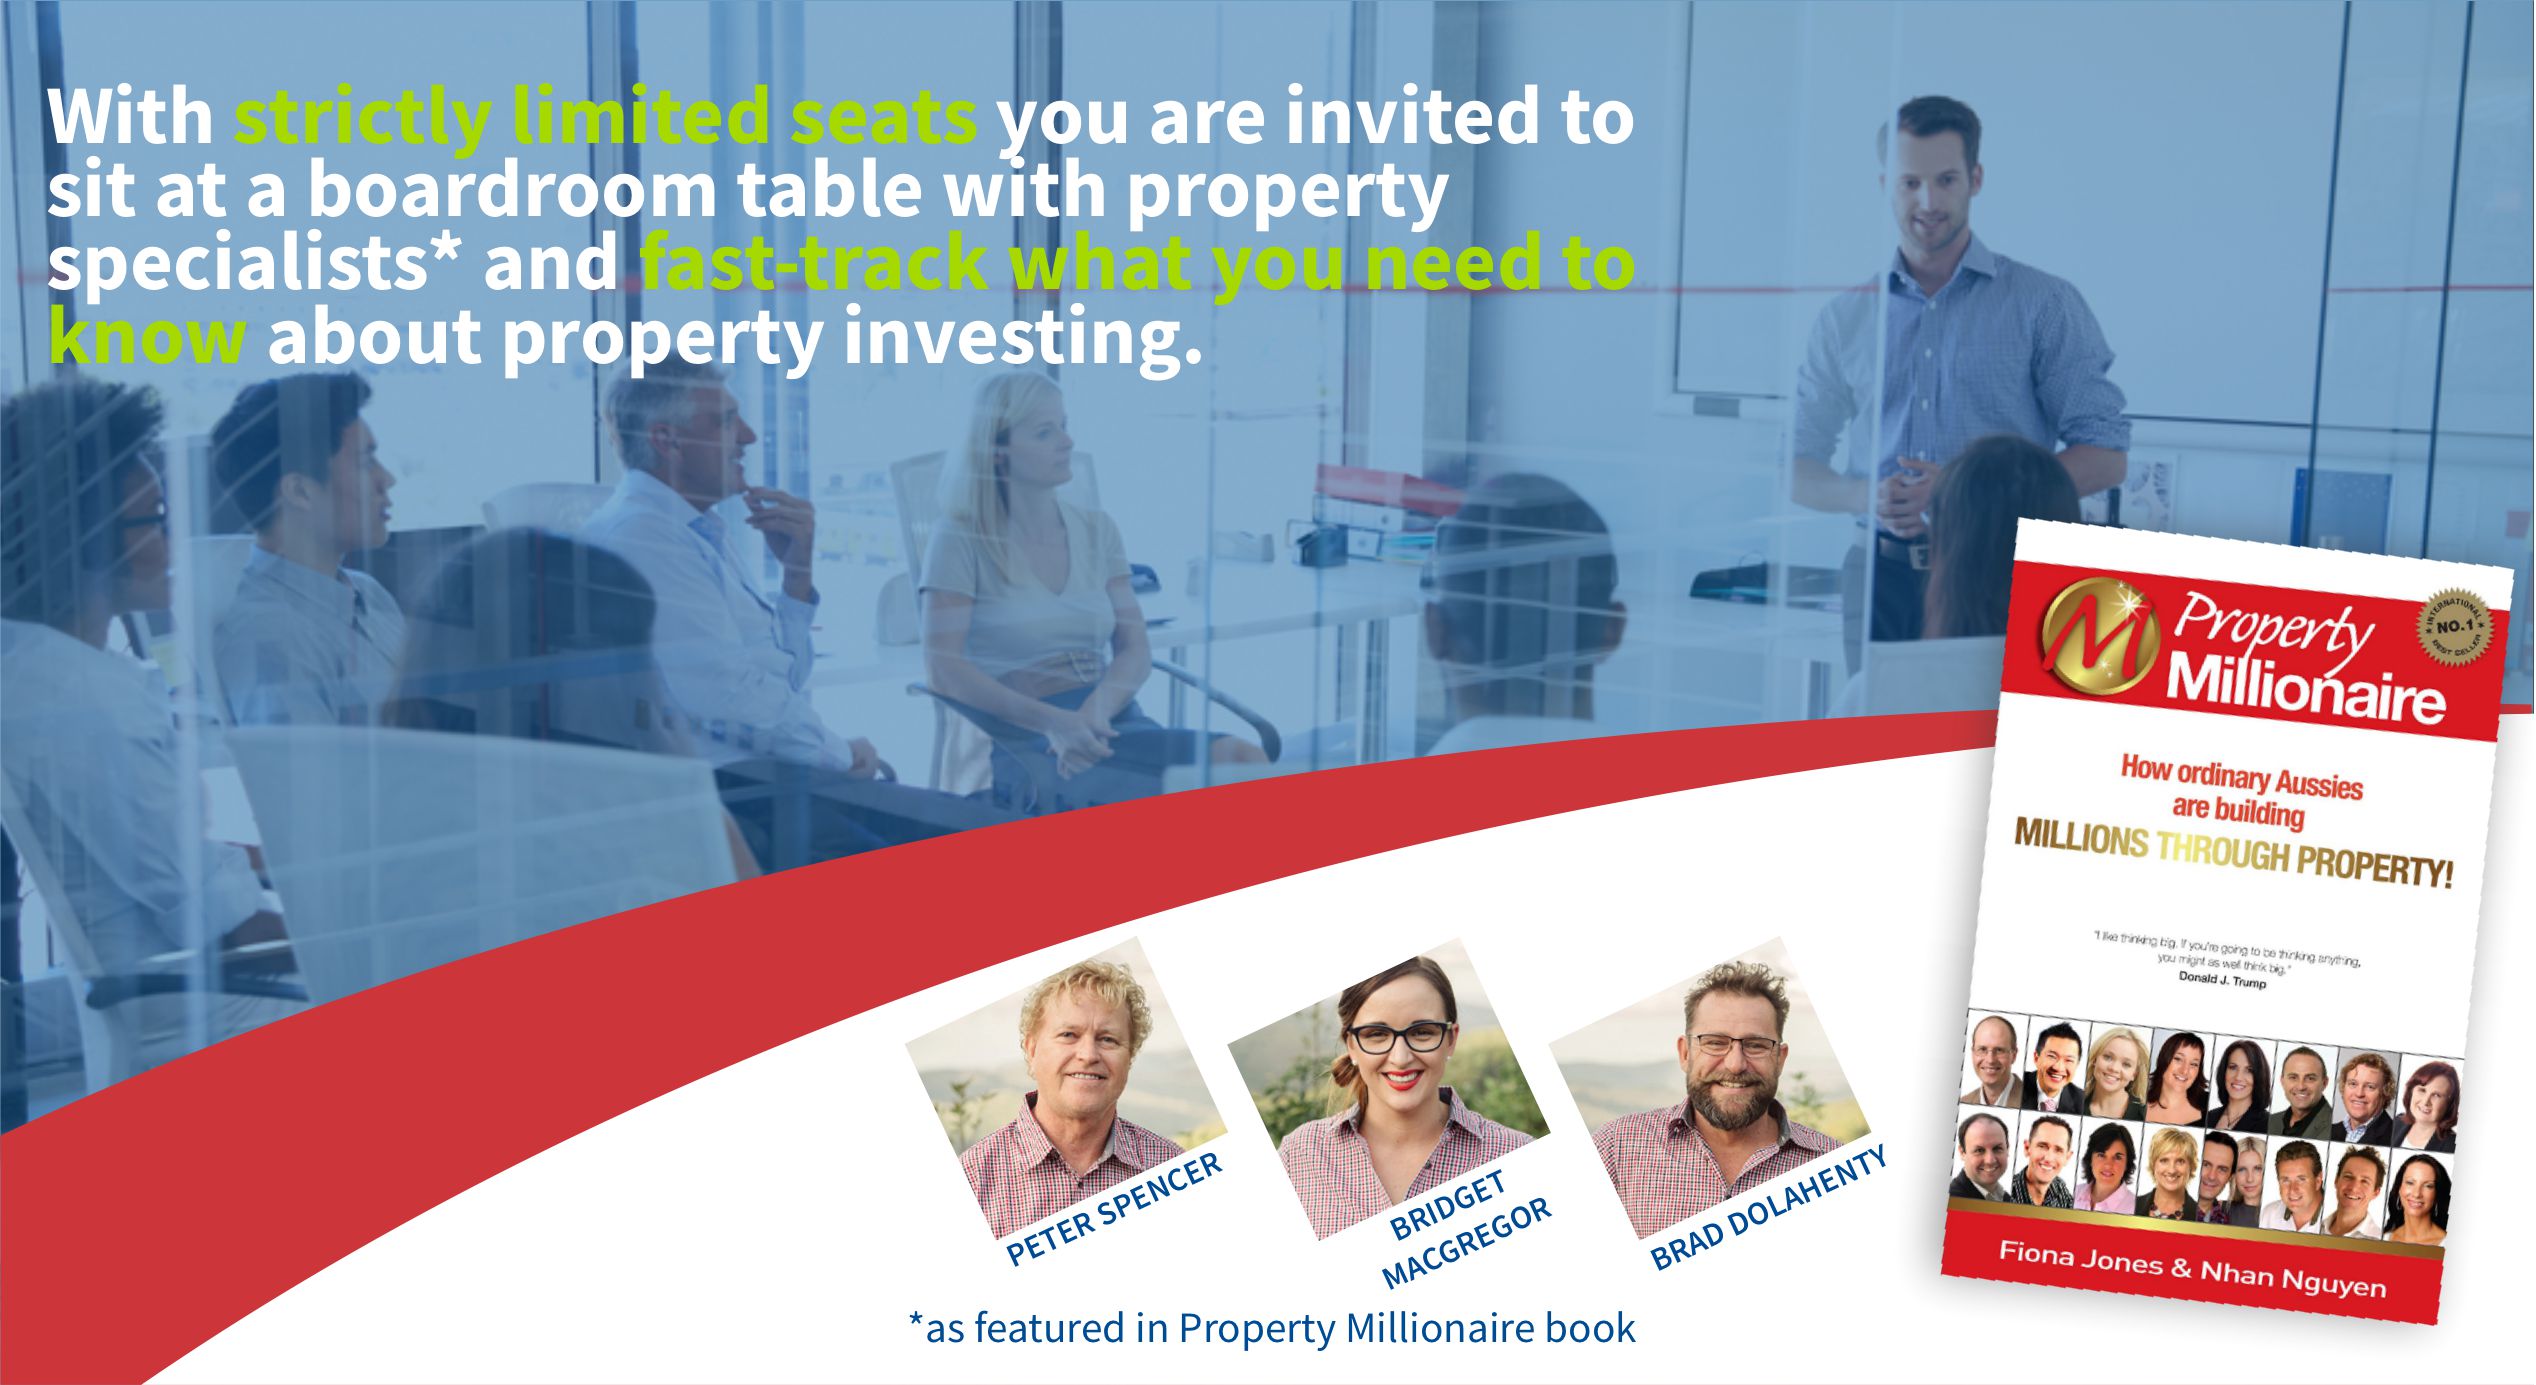 Learn what you need to know at the Property Millionaires Boardroom Brief